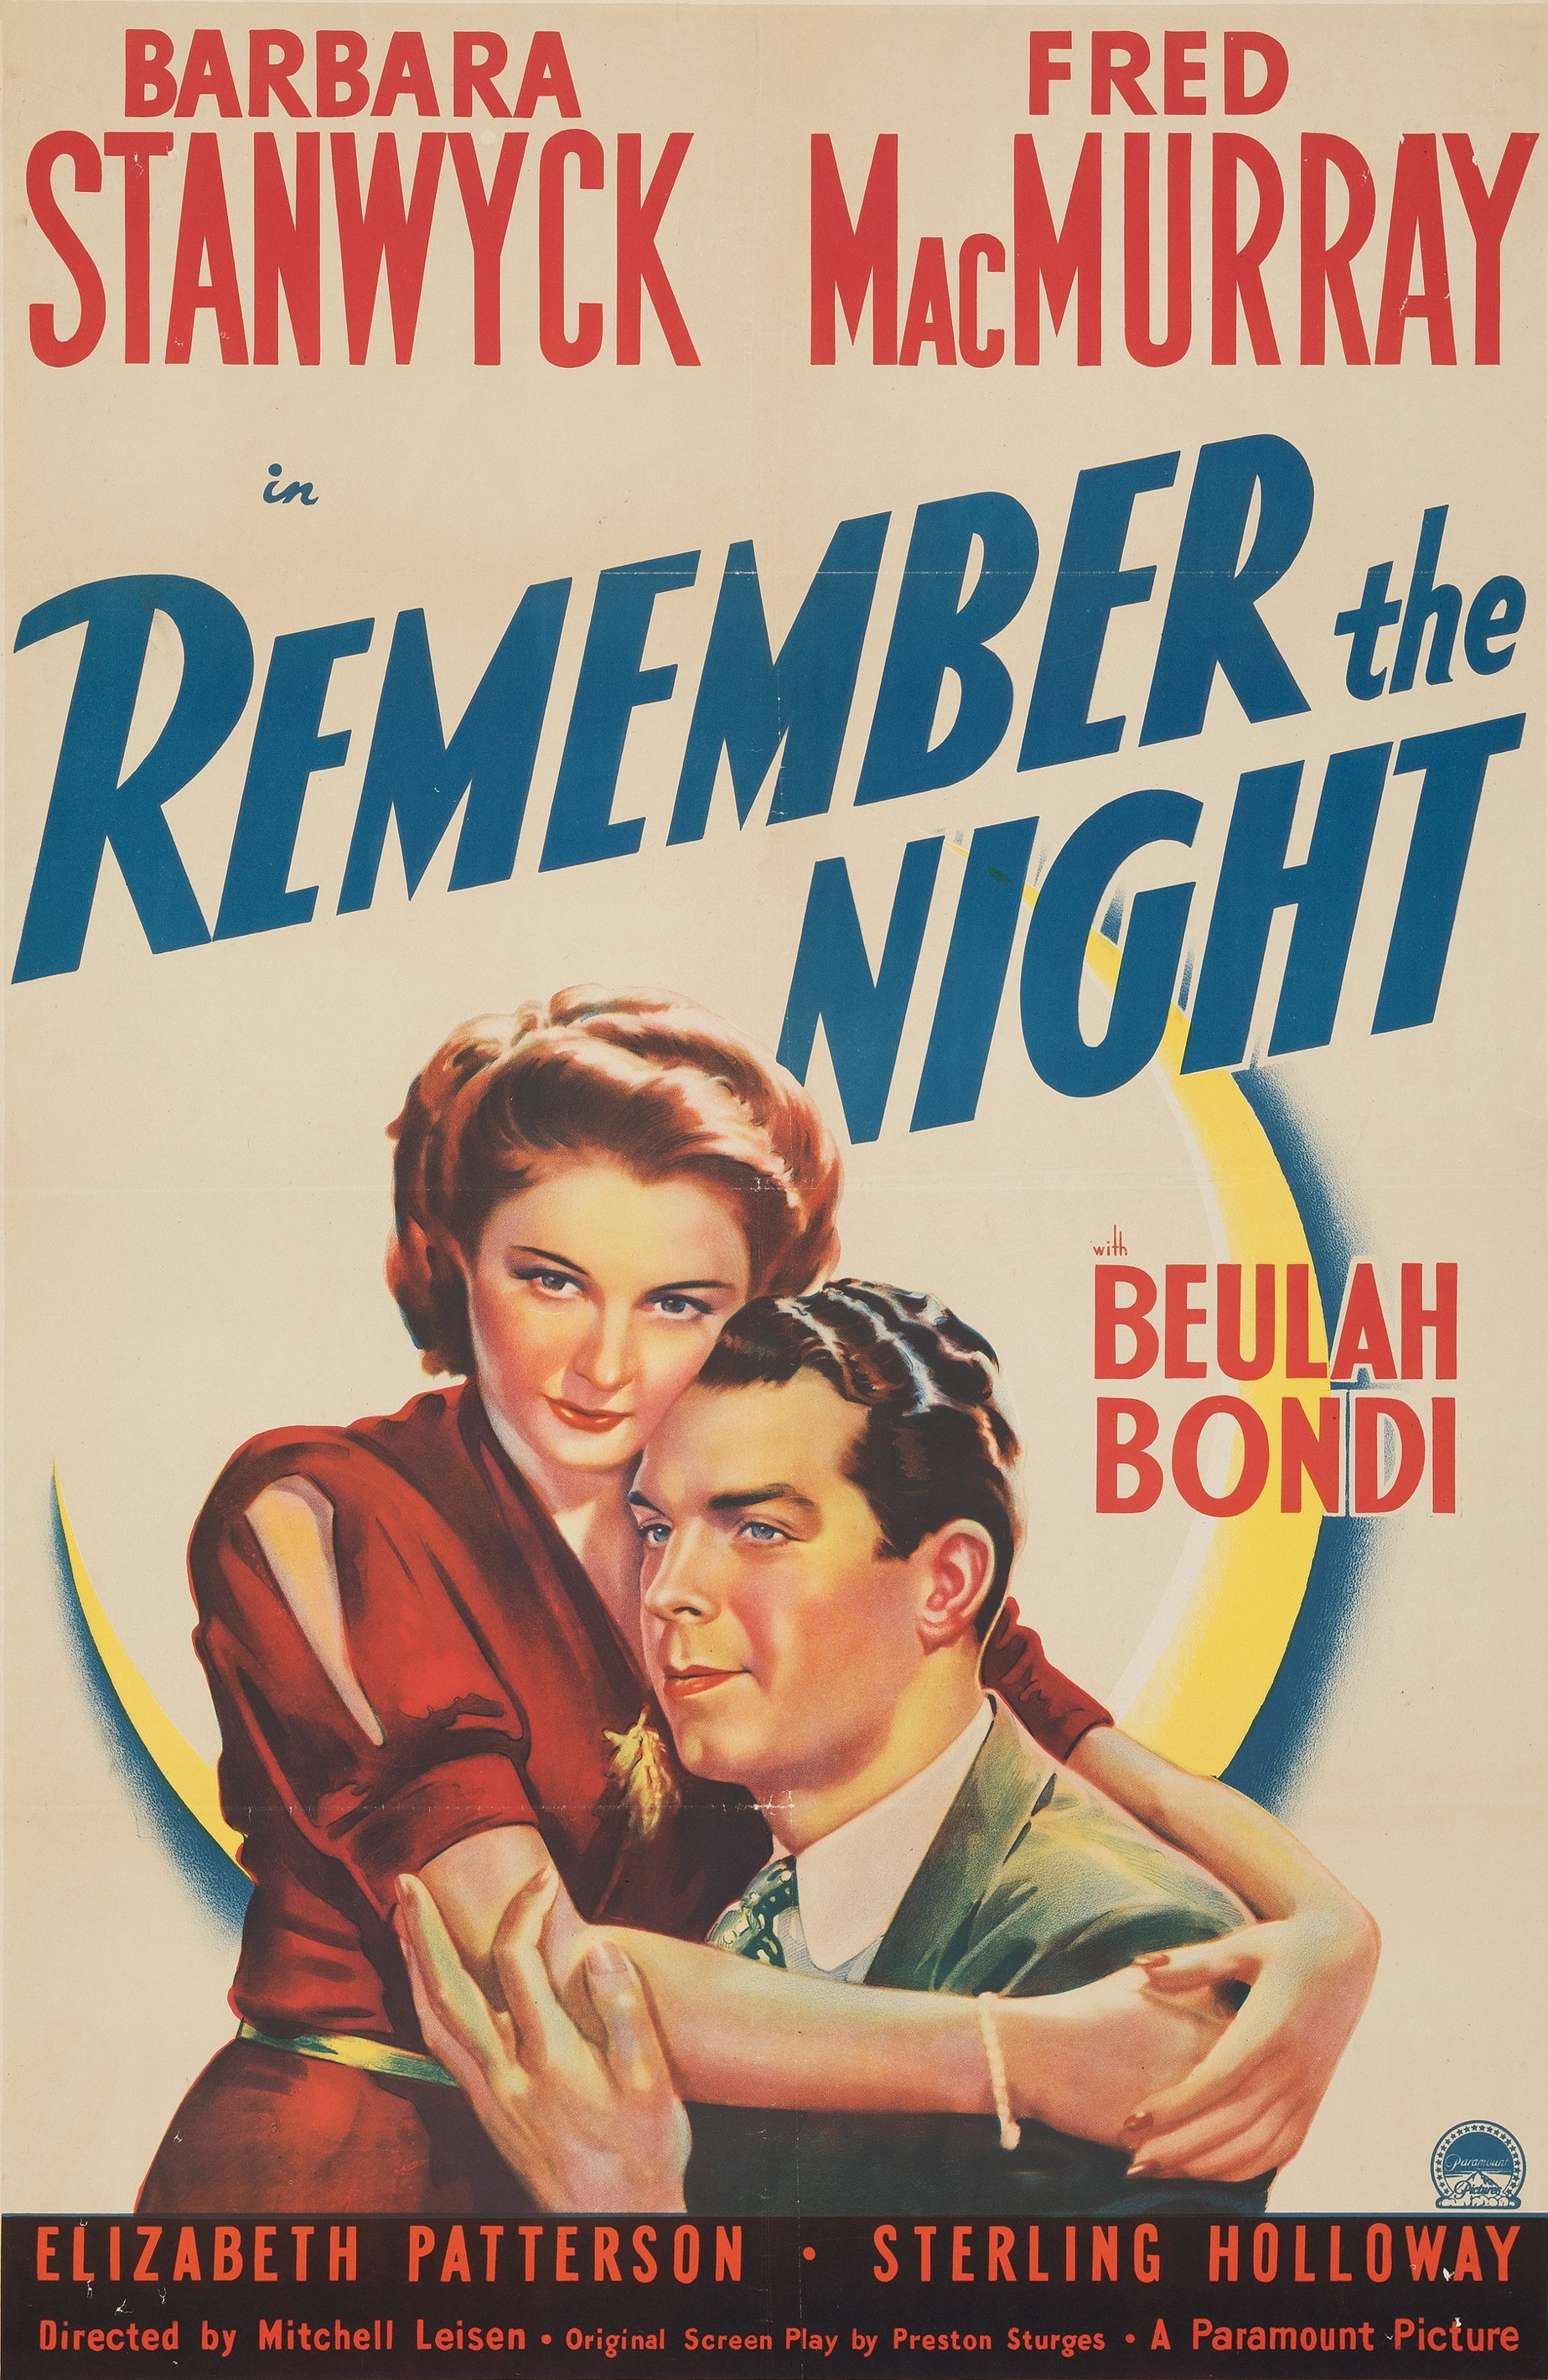 REMEMBER THE NIGHT (1940)